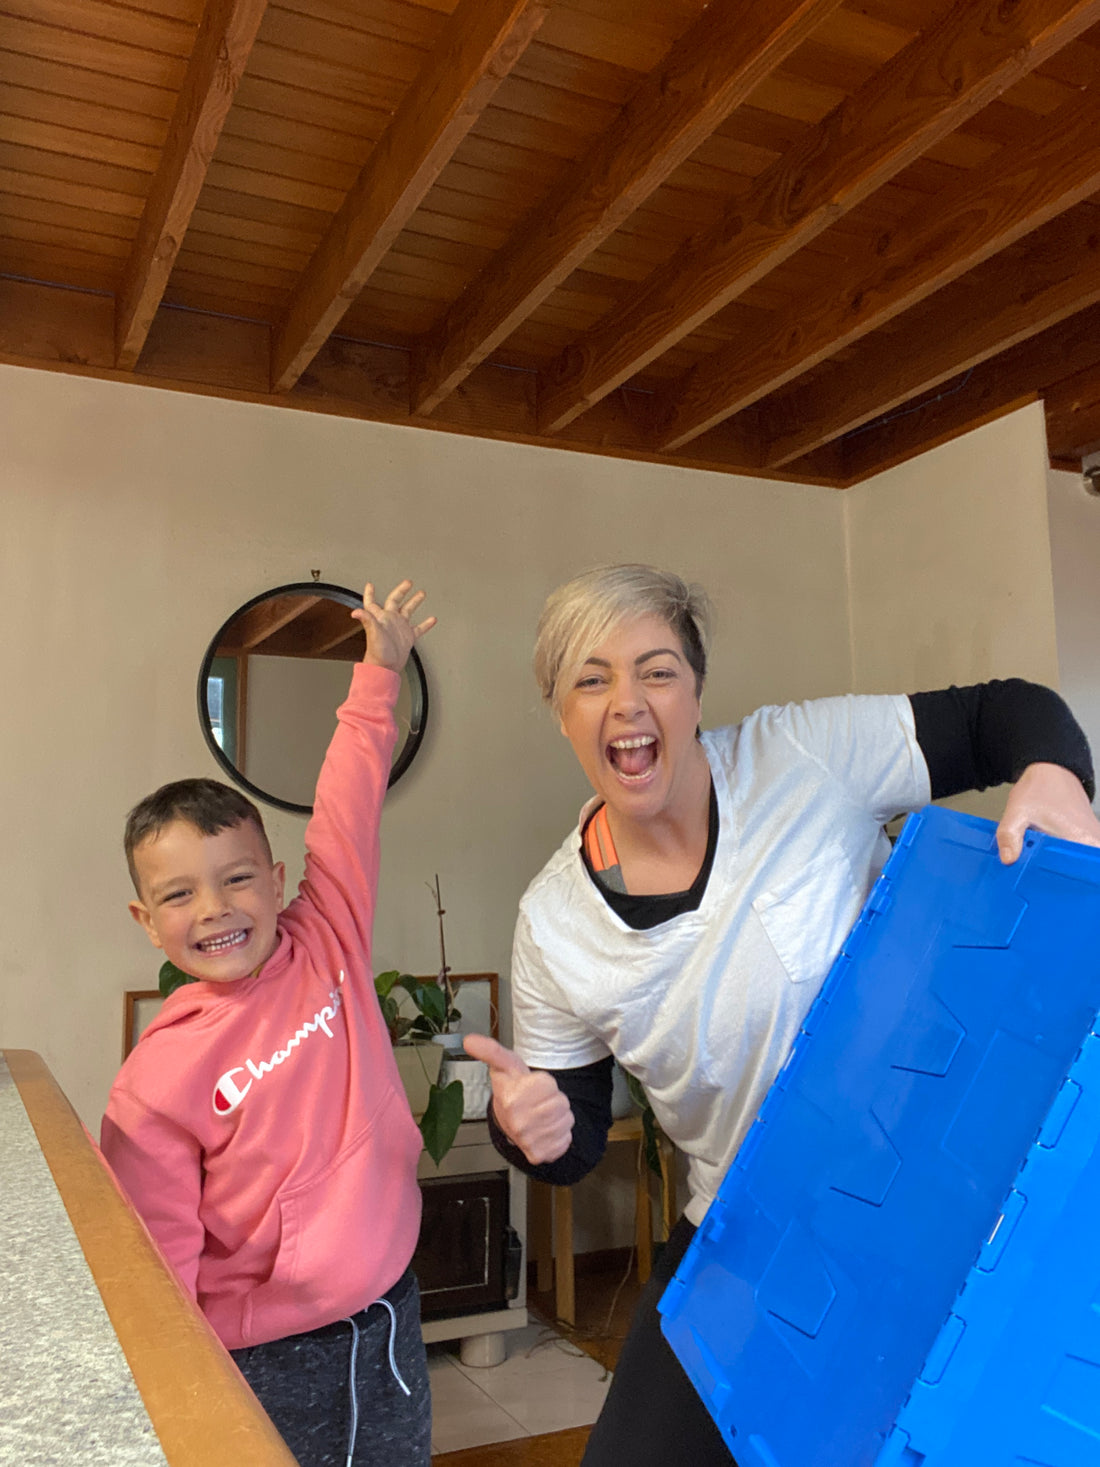 Rebekah Holmes and her son Otis celebrate the launch of Clutter Collect. They are smiling and Rebekah is holding a blue Clutter Box